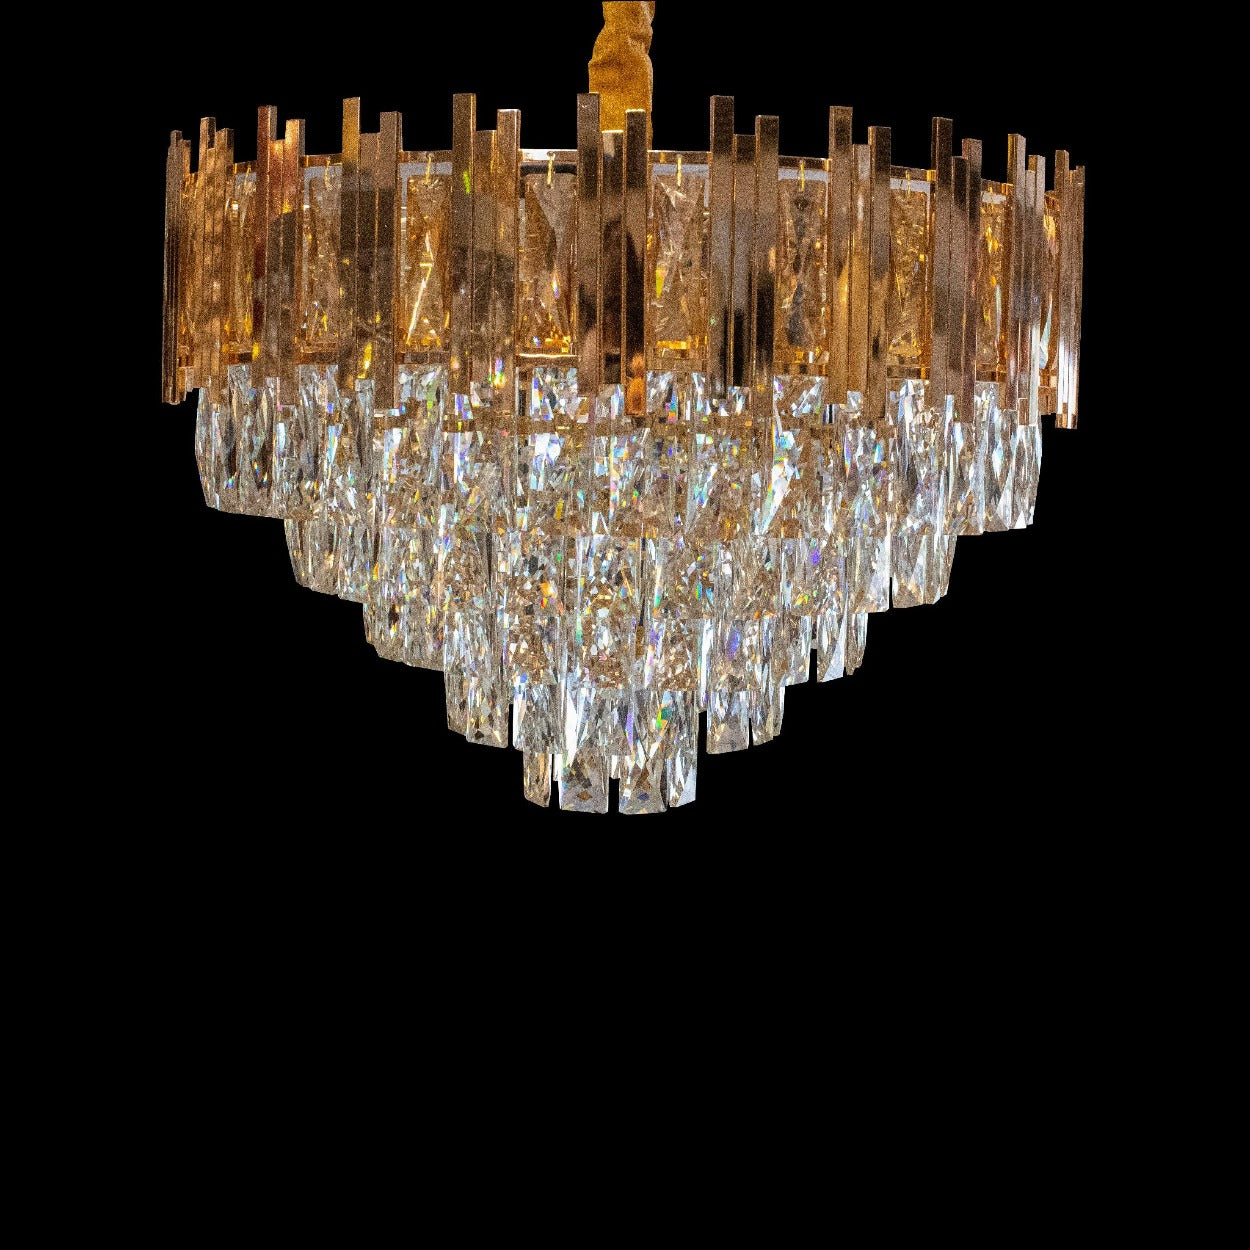 ANKUR ROUND CRYSTAL CHANDELIER WITH GOLD METAL PLATE - Ankur Lighting